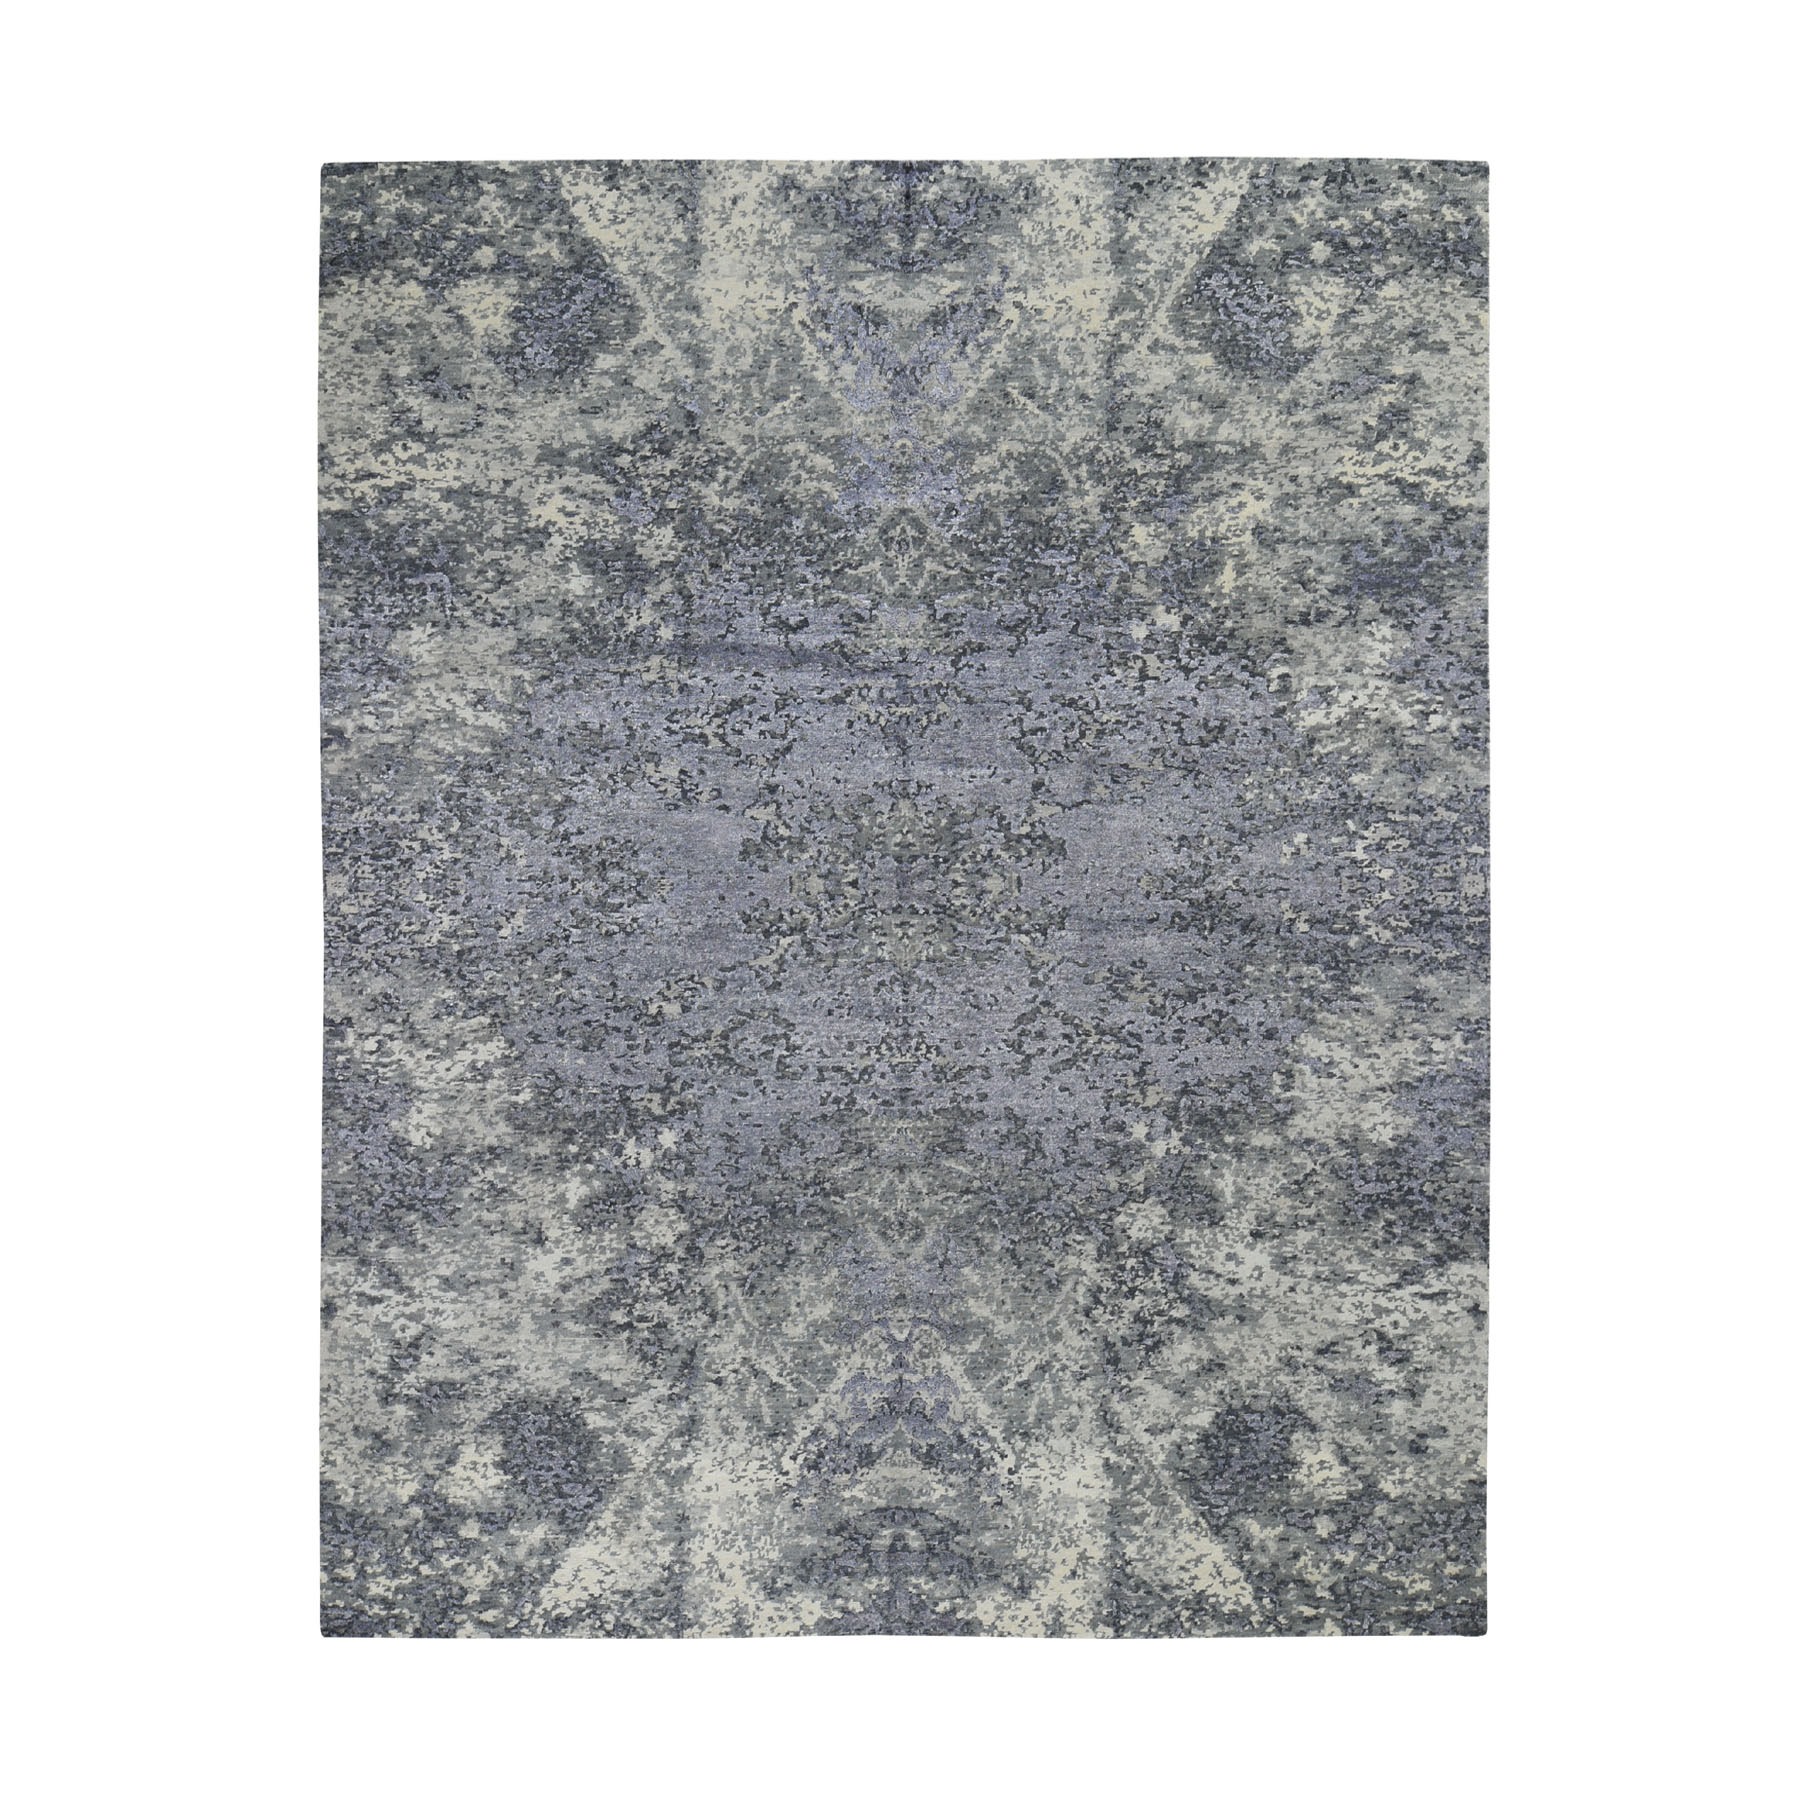 8'x9'9" Wool And Silk Abstract Tone-On-Tone Gray Hand Woven Oriental Rug 